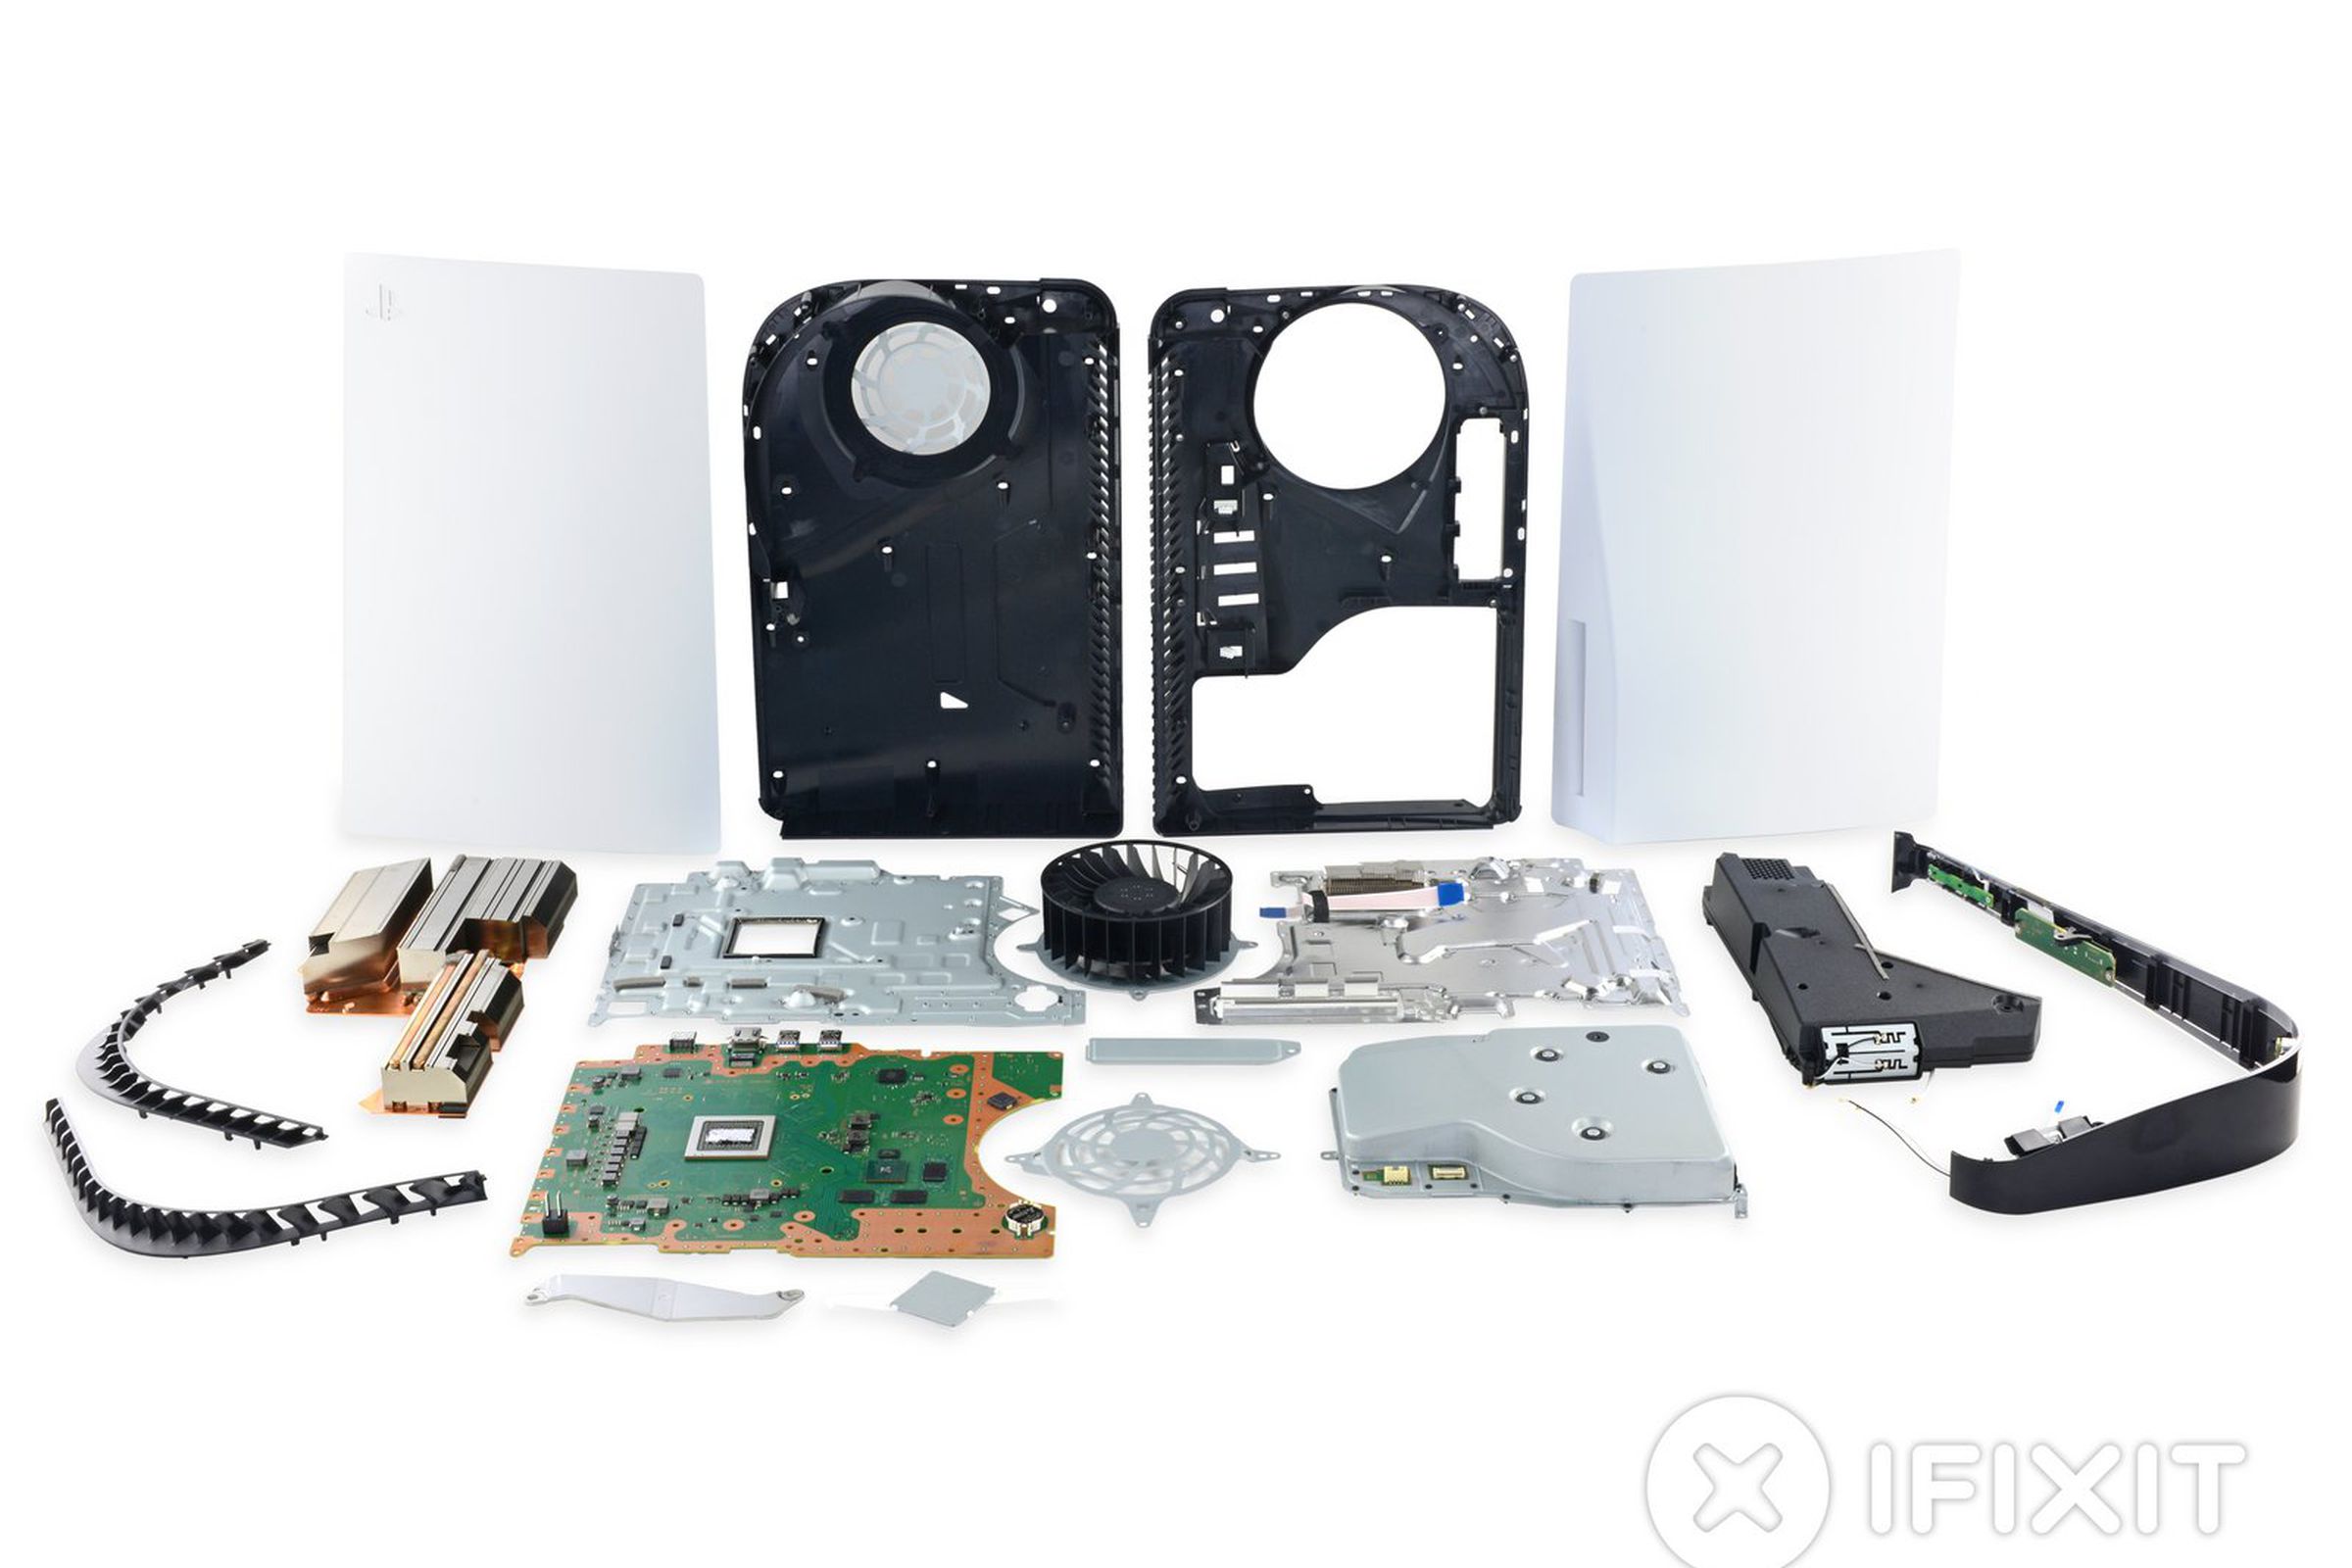 The PS5’s pieces after being disassembled 